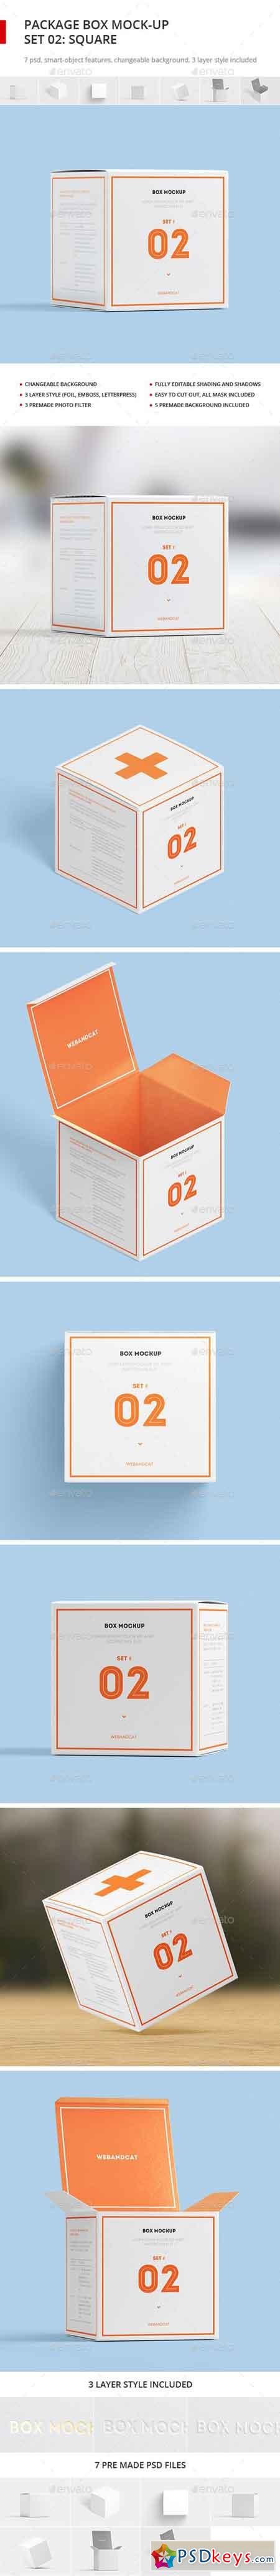 Package Box Mock-up, Set 2 Square Box 17728710